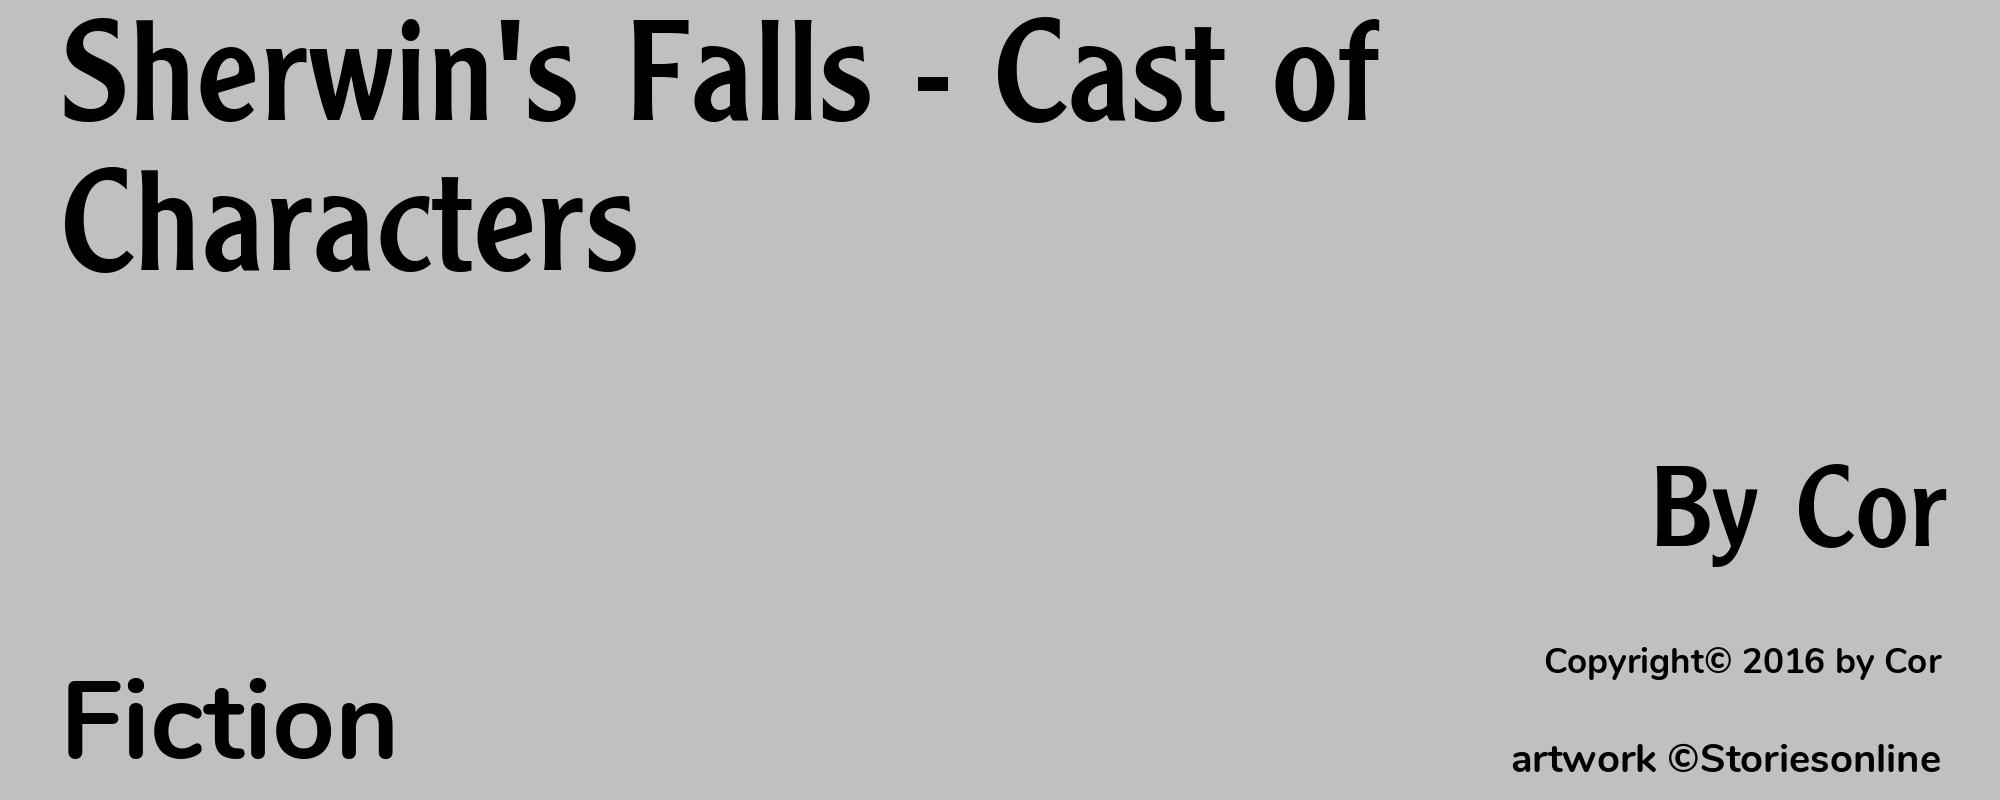 Sherwin's Falls - Cast of Characters - Cover